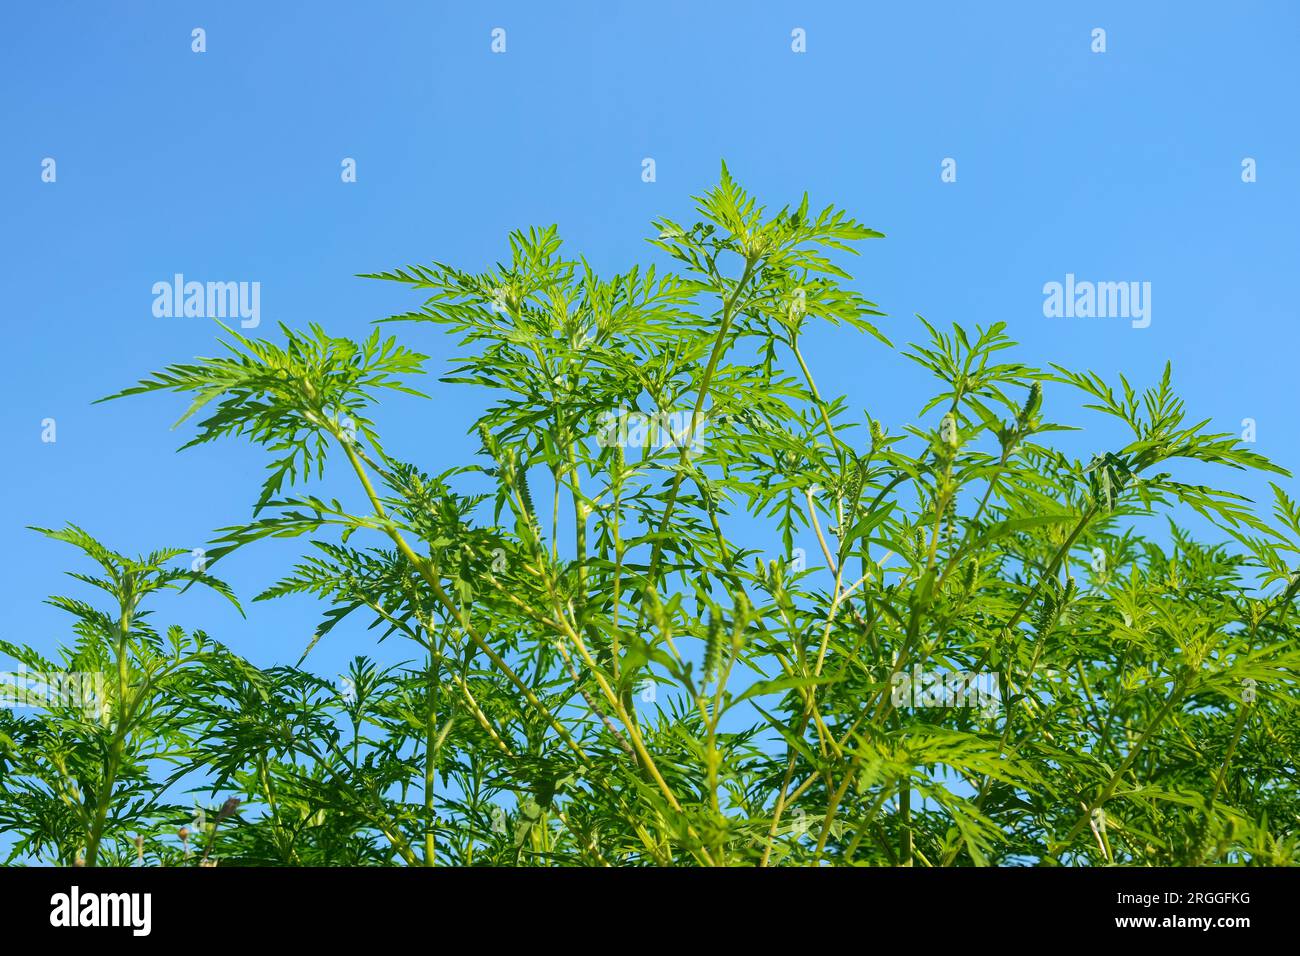 American common ragweed against blue cloudless sky. Dangerous plant. Ambrosia shrubs that causes allergic reactions, allergic rhinitis. Copy space. Se Stock Photo